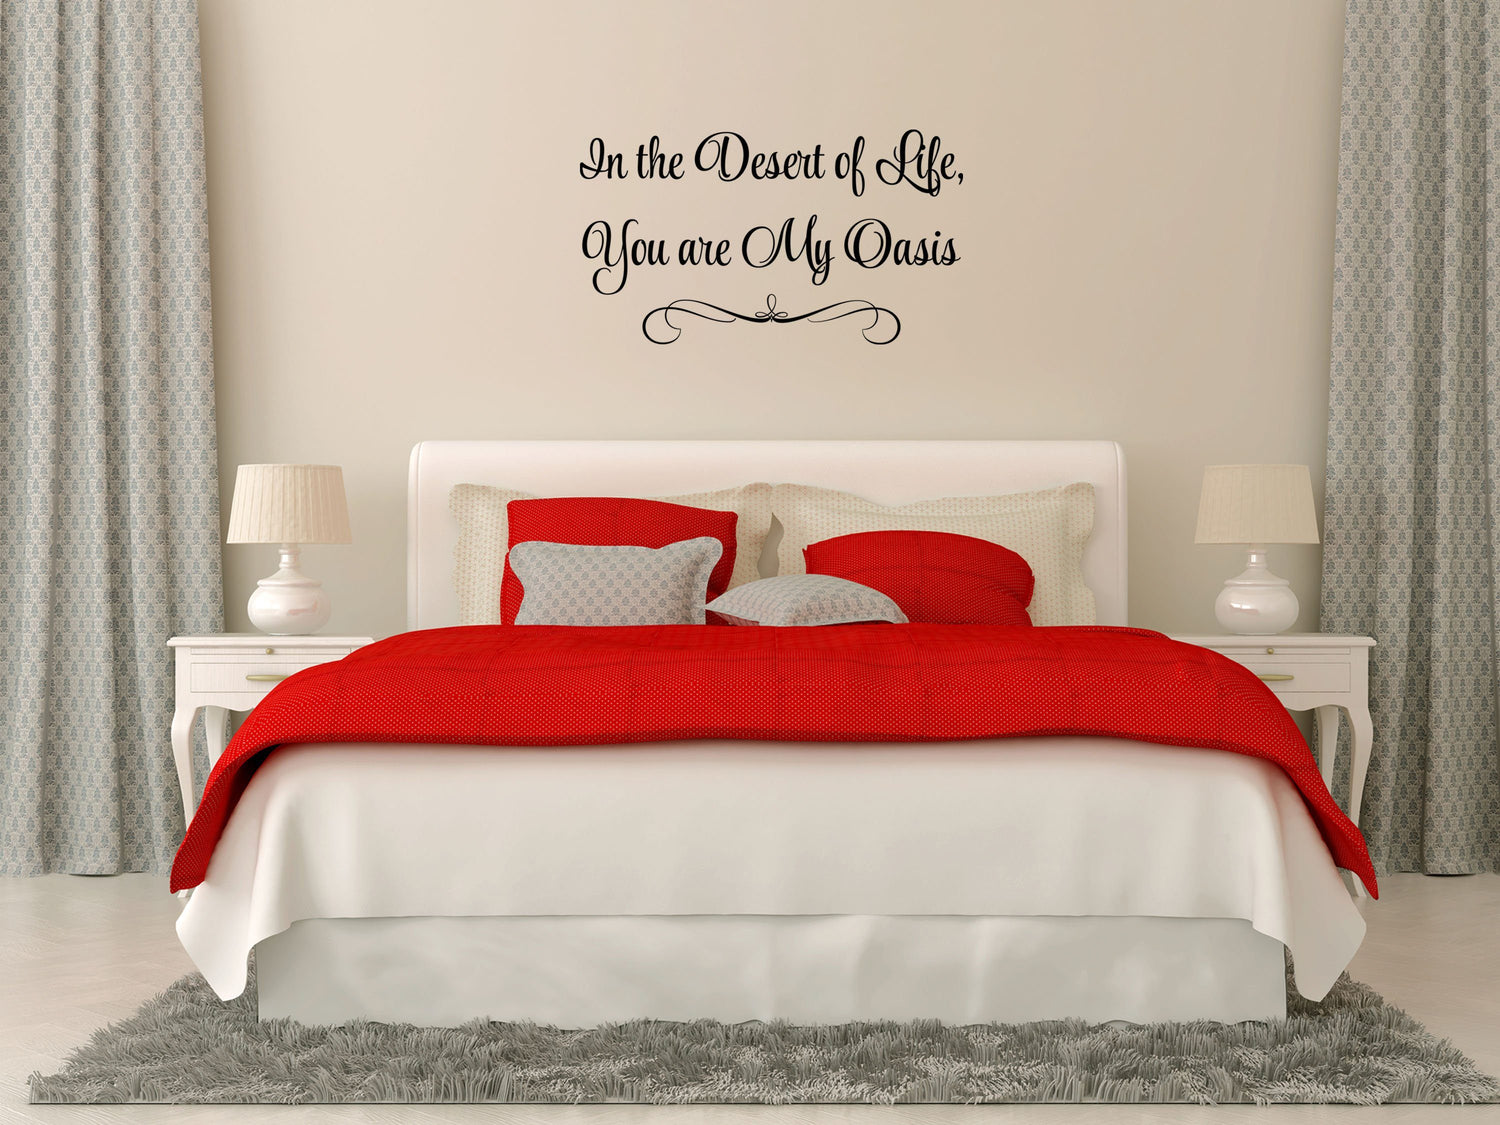 In The Desert Of Life Inspirational Vinyl Wall Decal - Inspirational Wall Decals Vinyl Wall Decal Done 